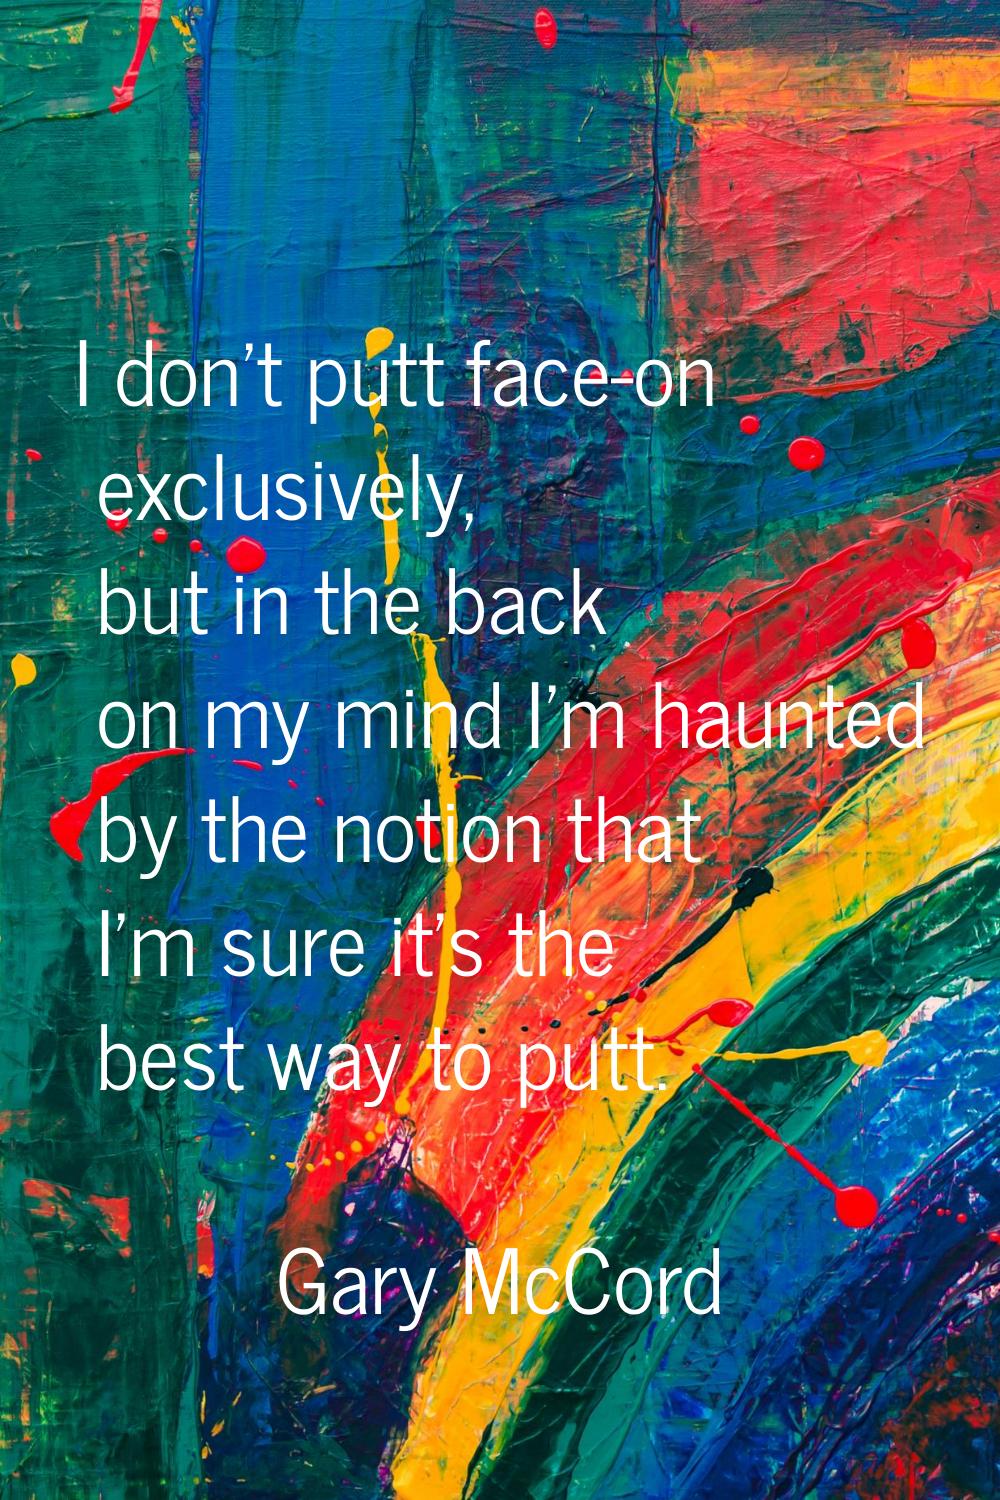 I don't putt face-on exclusively, but in the back on my mind I'm haunted by the notion that I'm sur